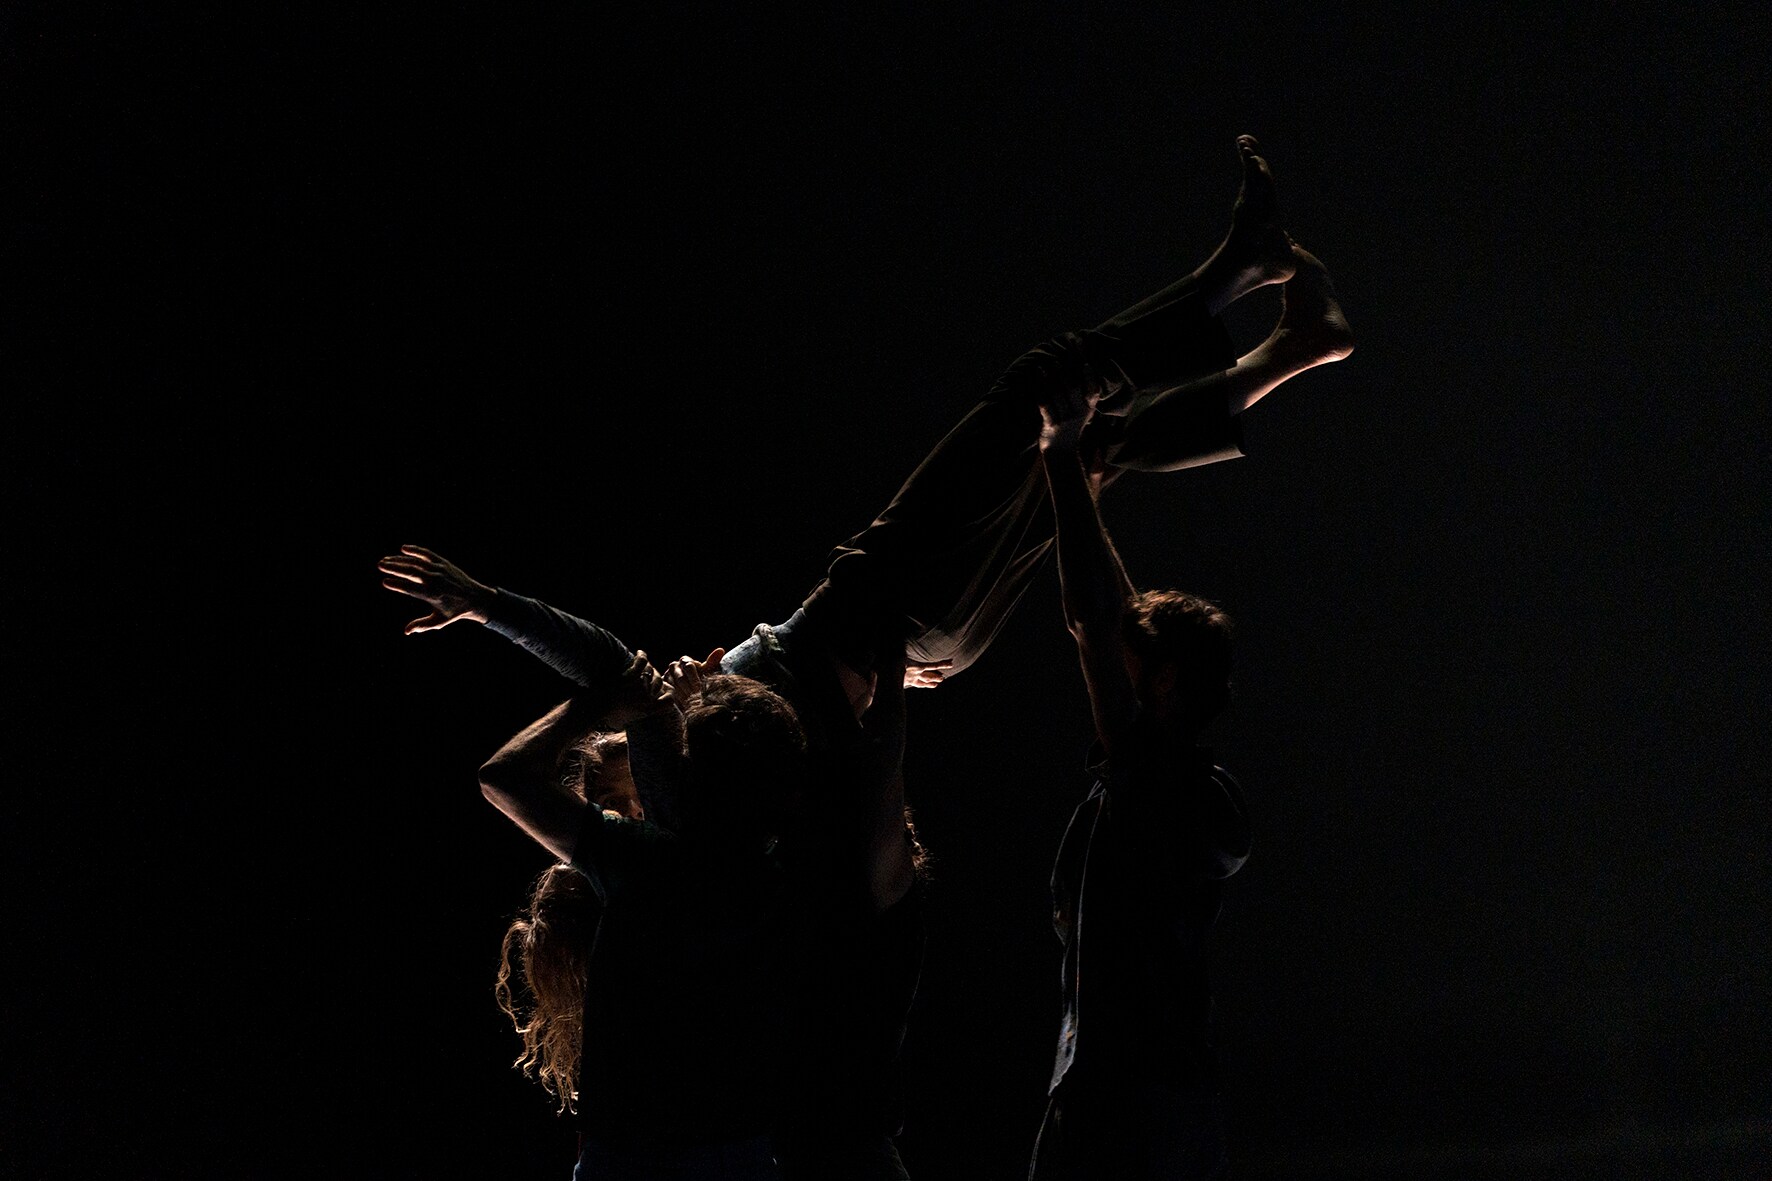 Dancers carrying a person up in the air on a dark stage